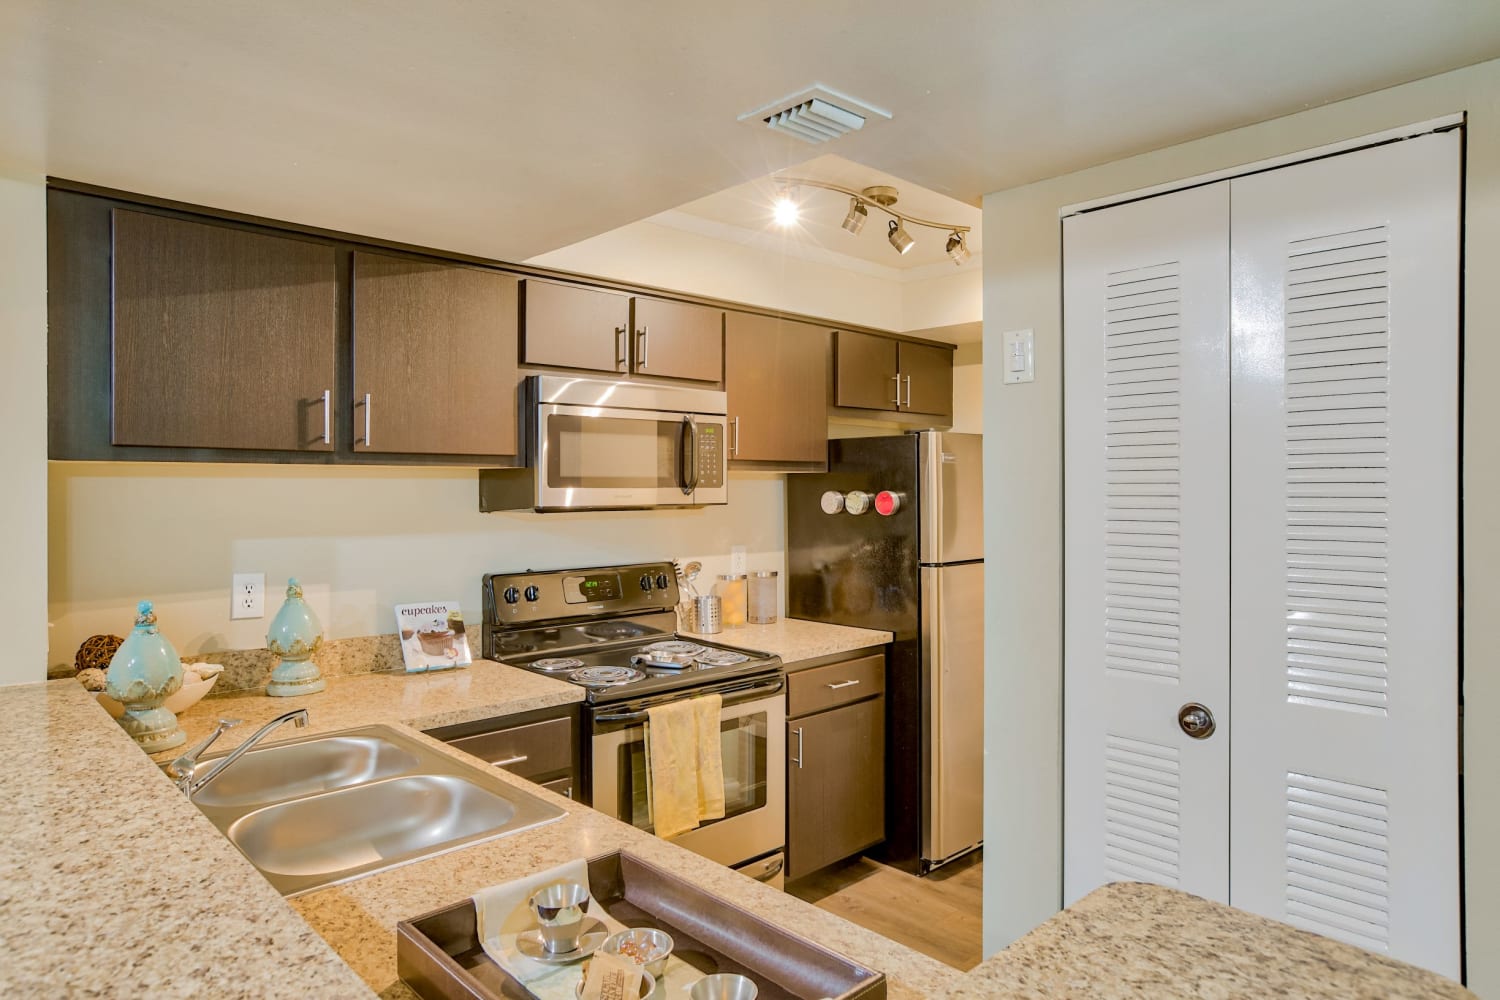 Model kitchen at Village Place Apartment Homes in West Palm Beach, Florida